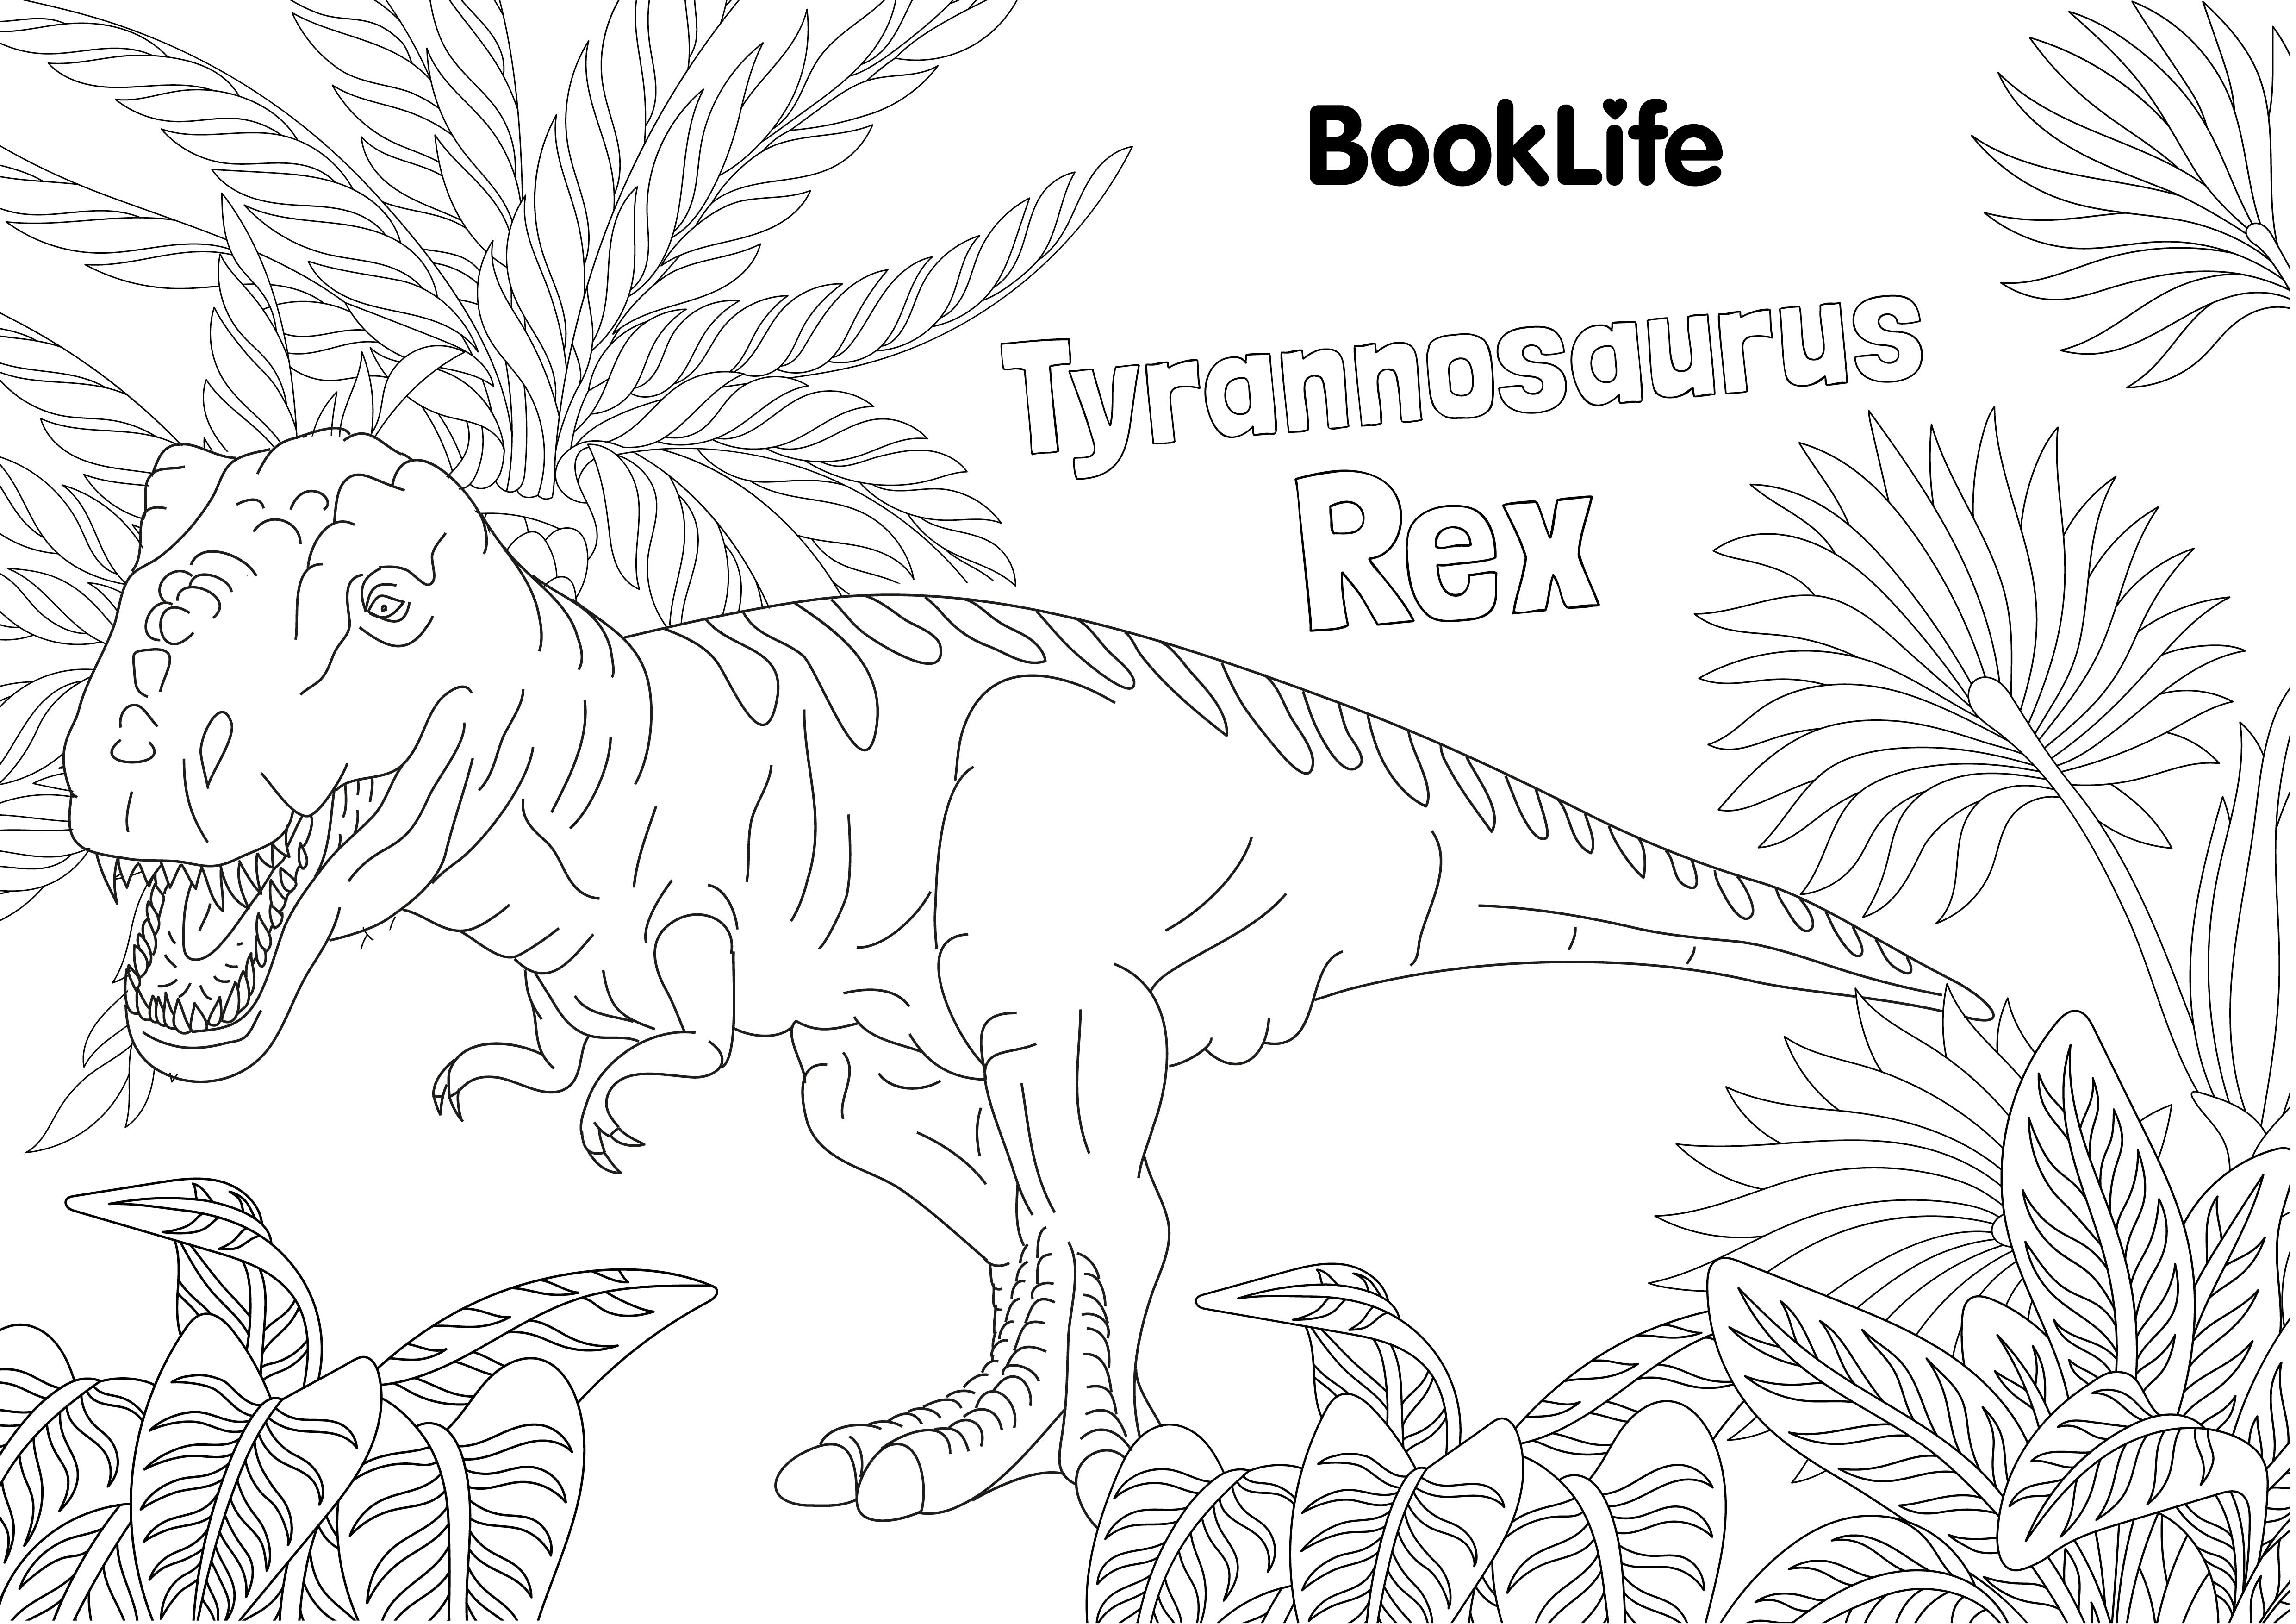 Free T.Rex Colouring Sheet by BookLife